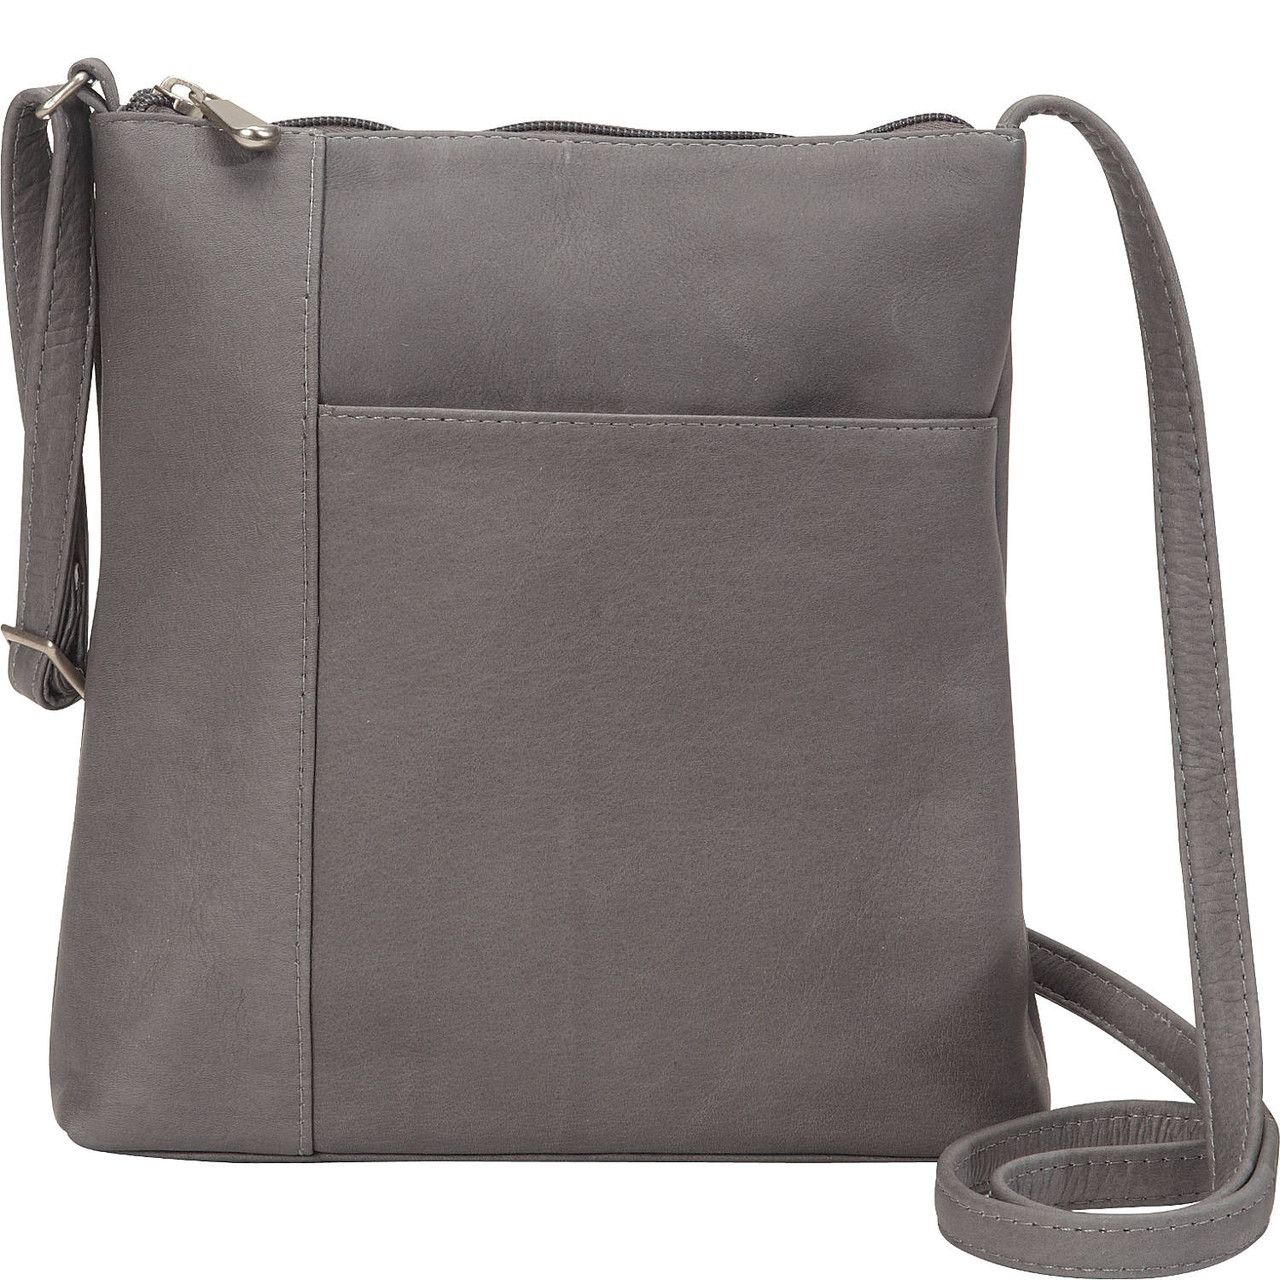 Le Donne Leather - Runaway Crossbody (Navy)